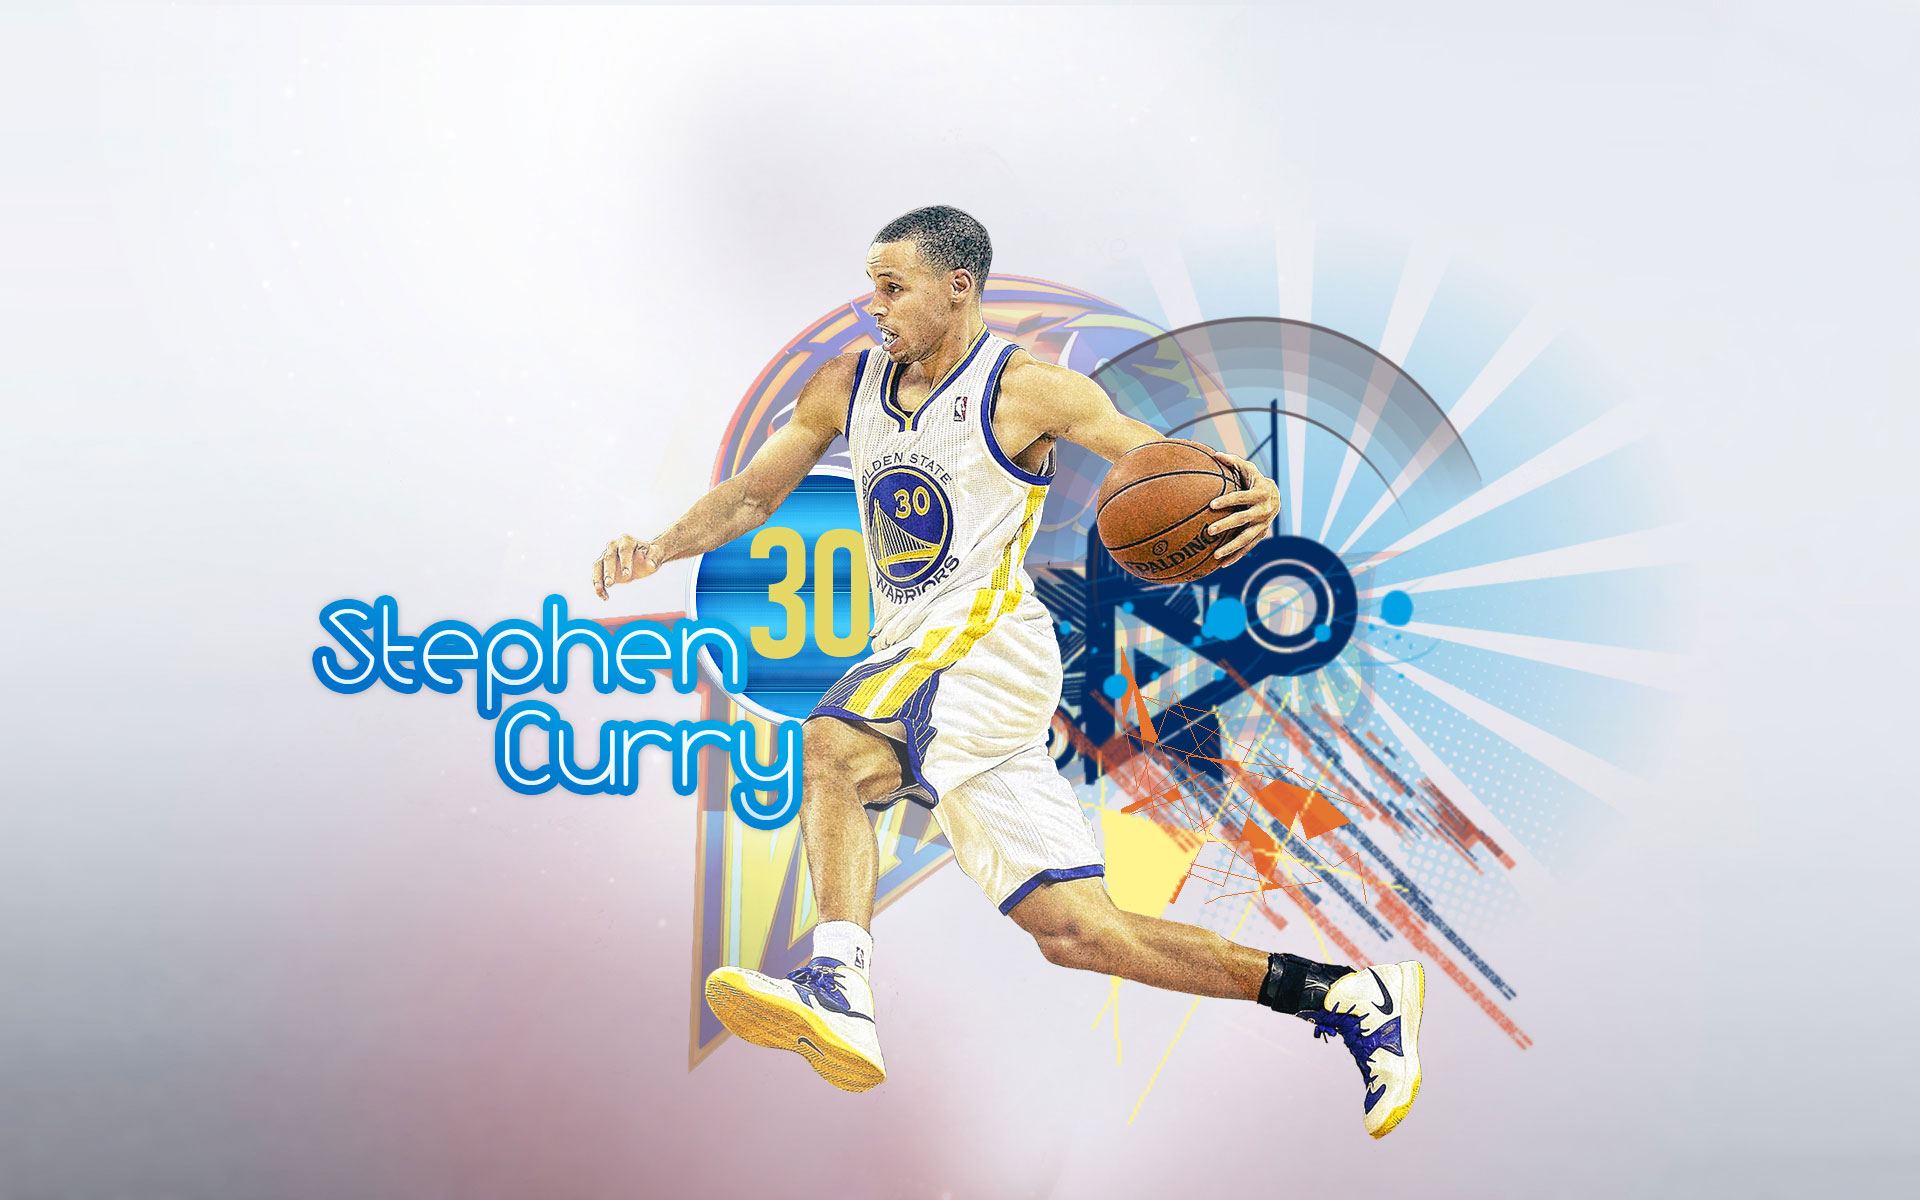 Stephen Curry Wallpapers  Basketball Wallpapers at   Curry wallpaper  Stephen curry wallpaper Nba wallpapers